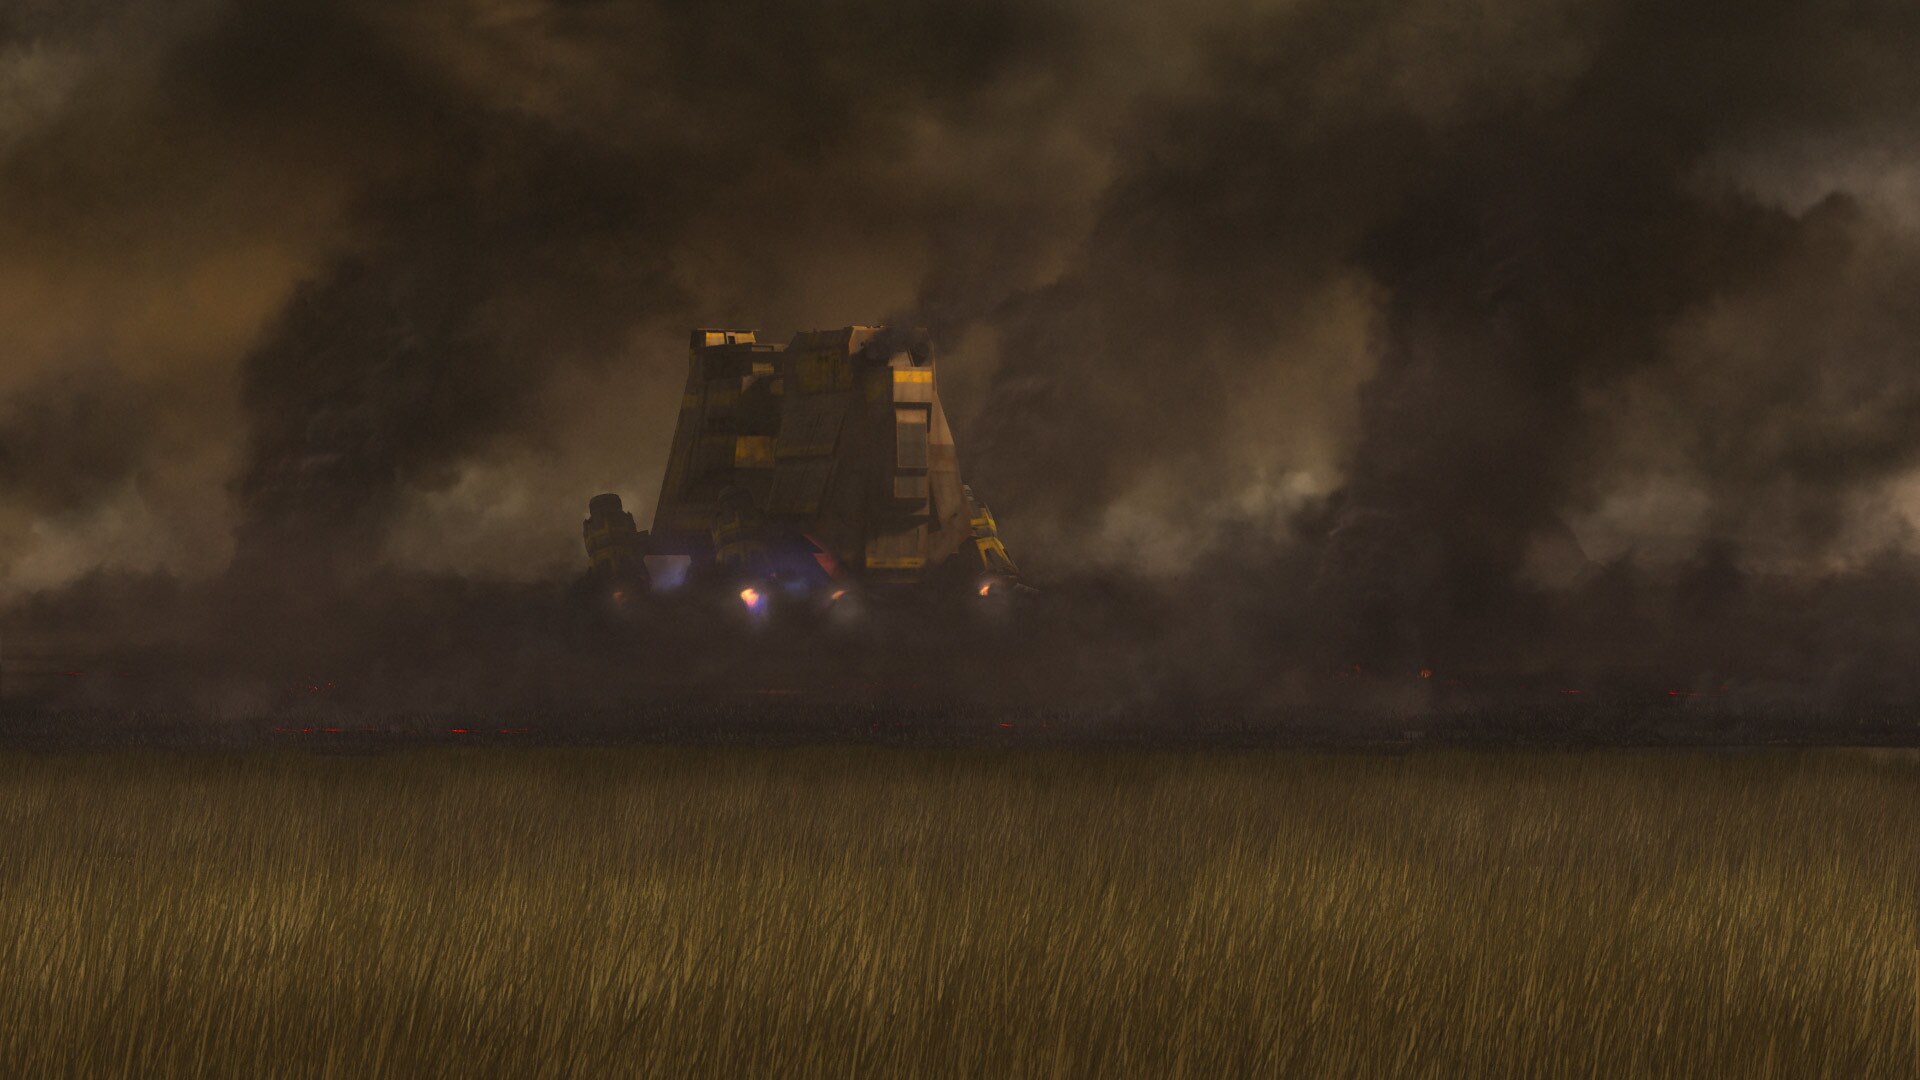 The rebels approach the massive ore crawler and Sabine blasts off to infiltrate, taking out the s...